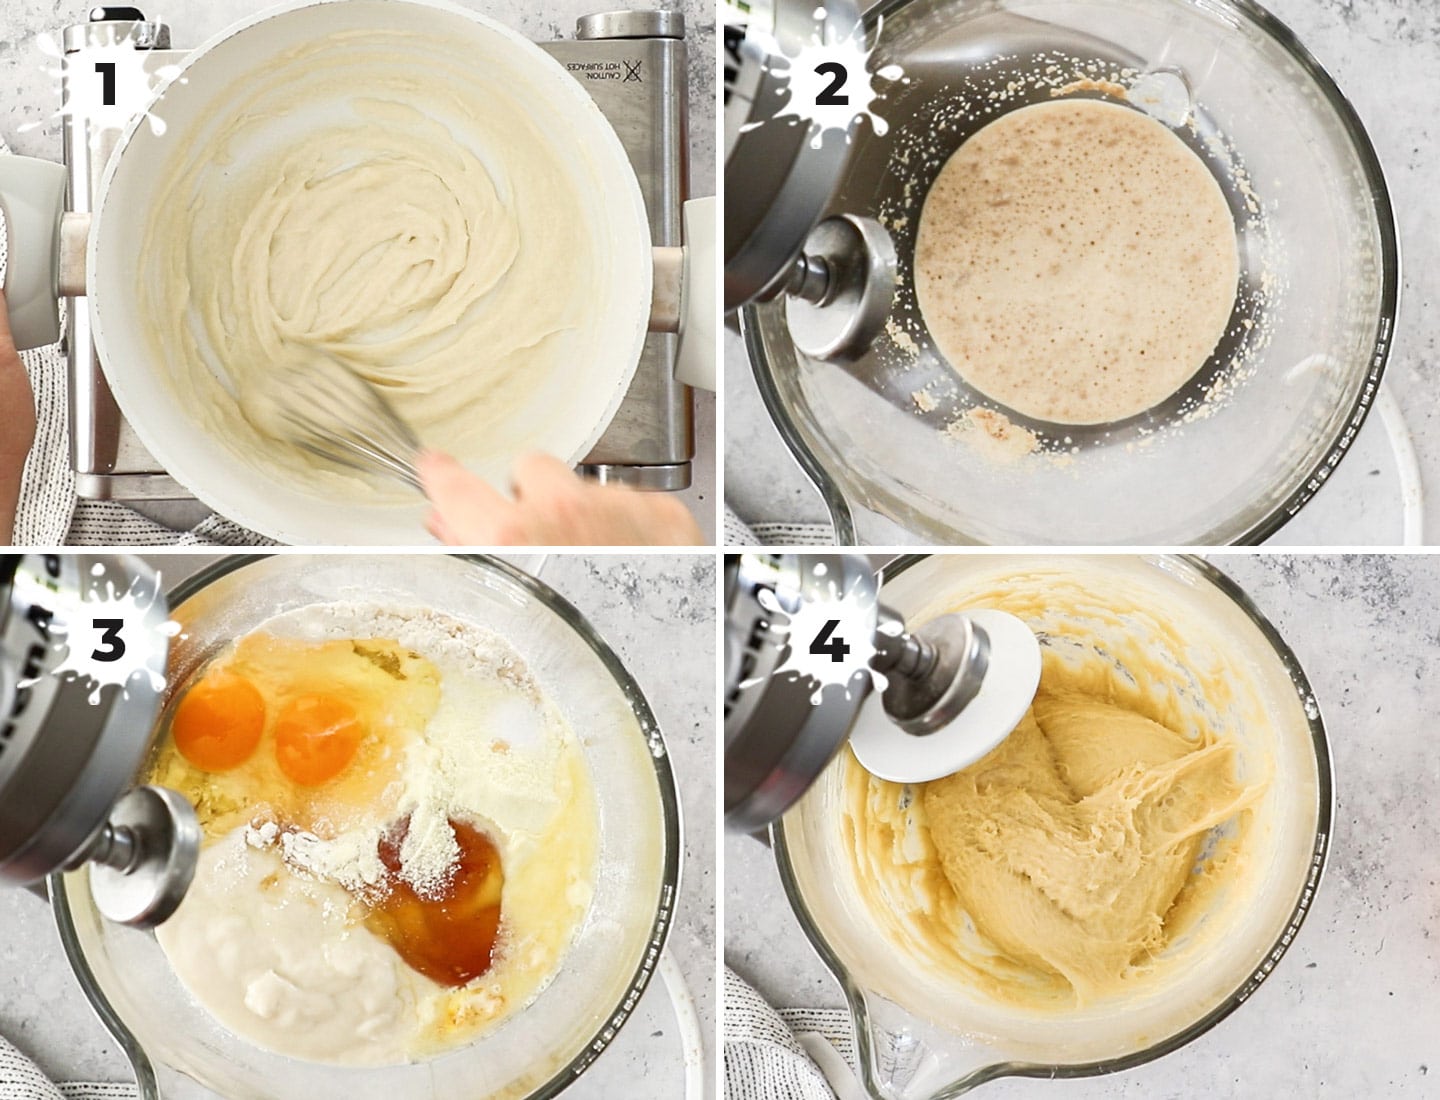 A collage showing how to make Maritozzi dough.